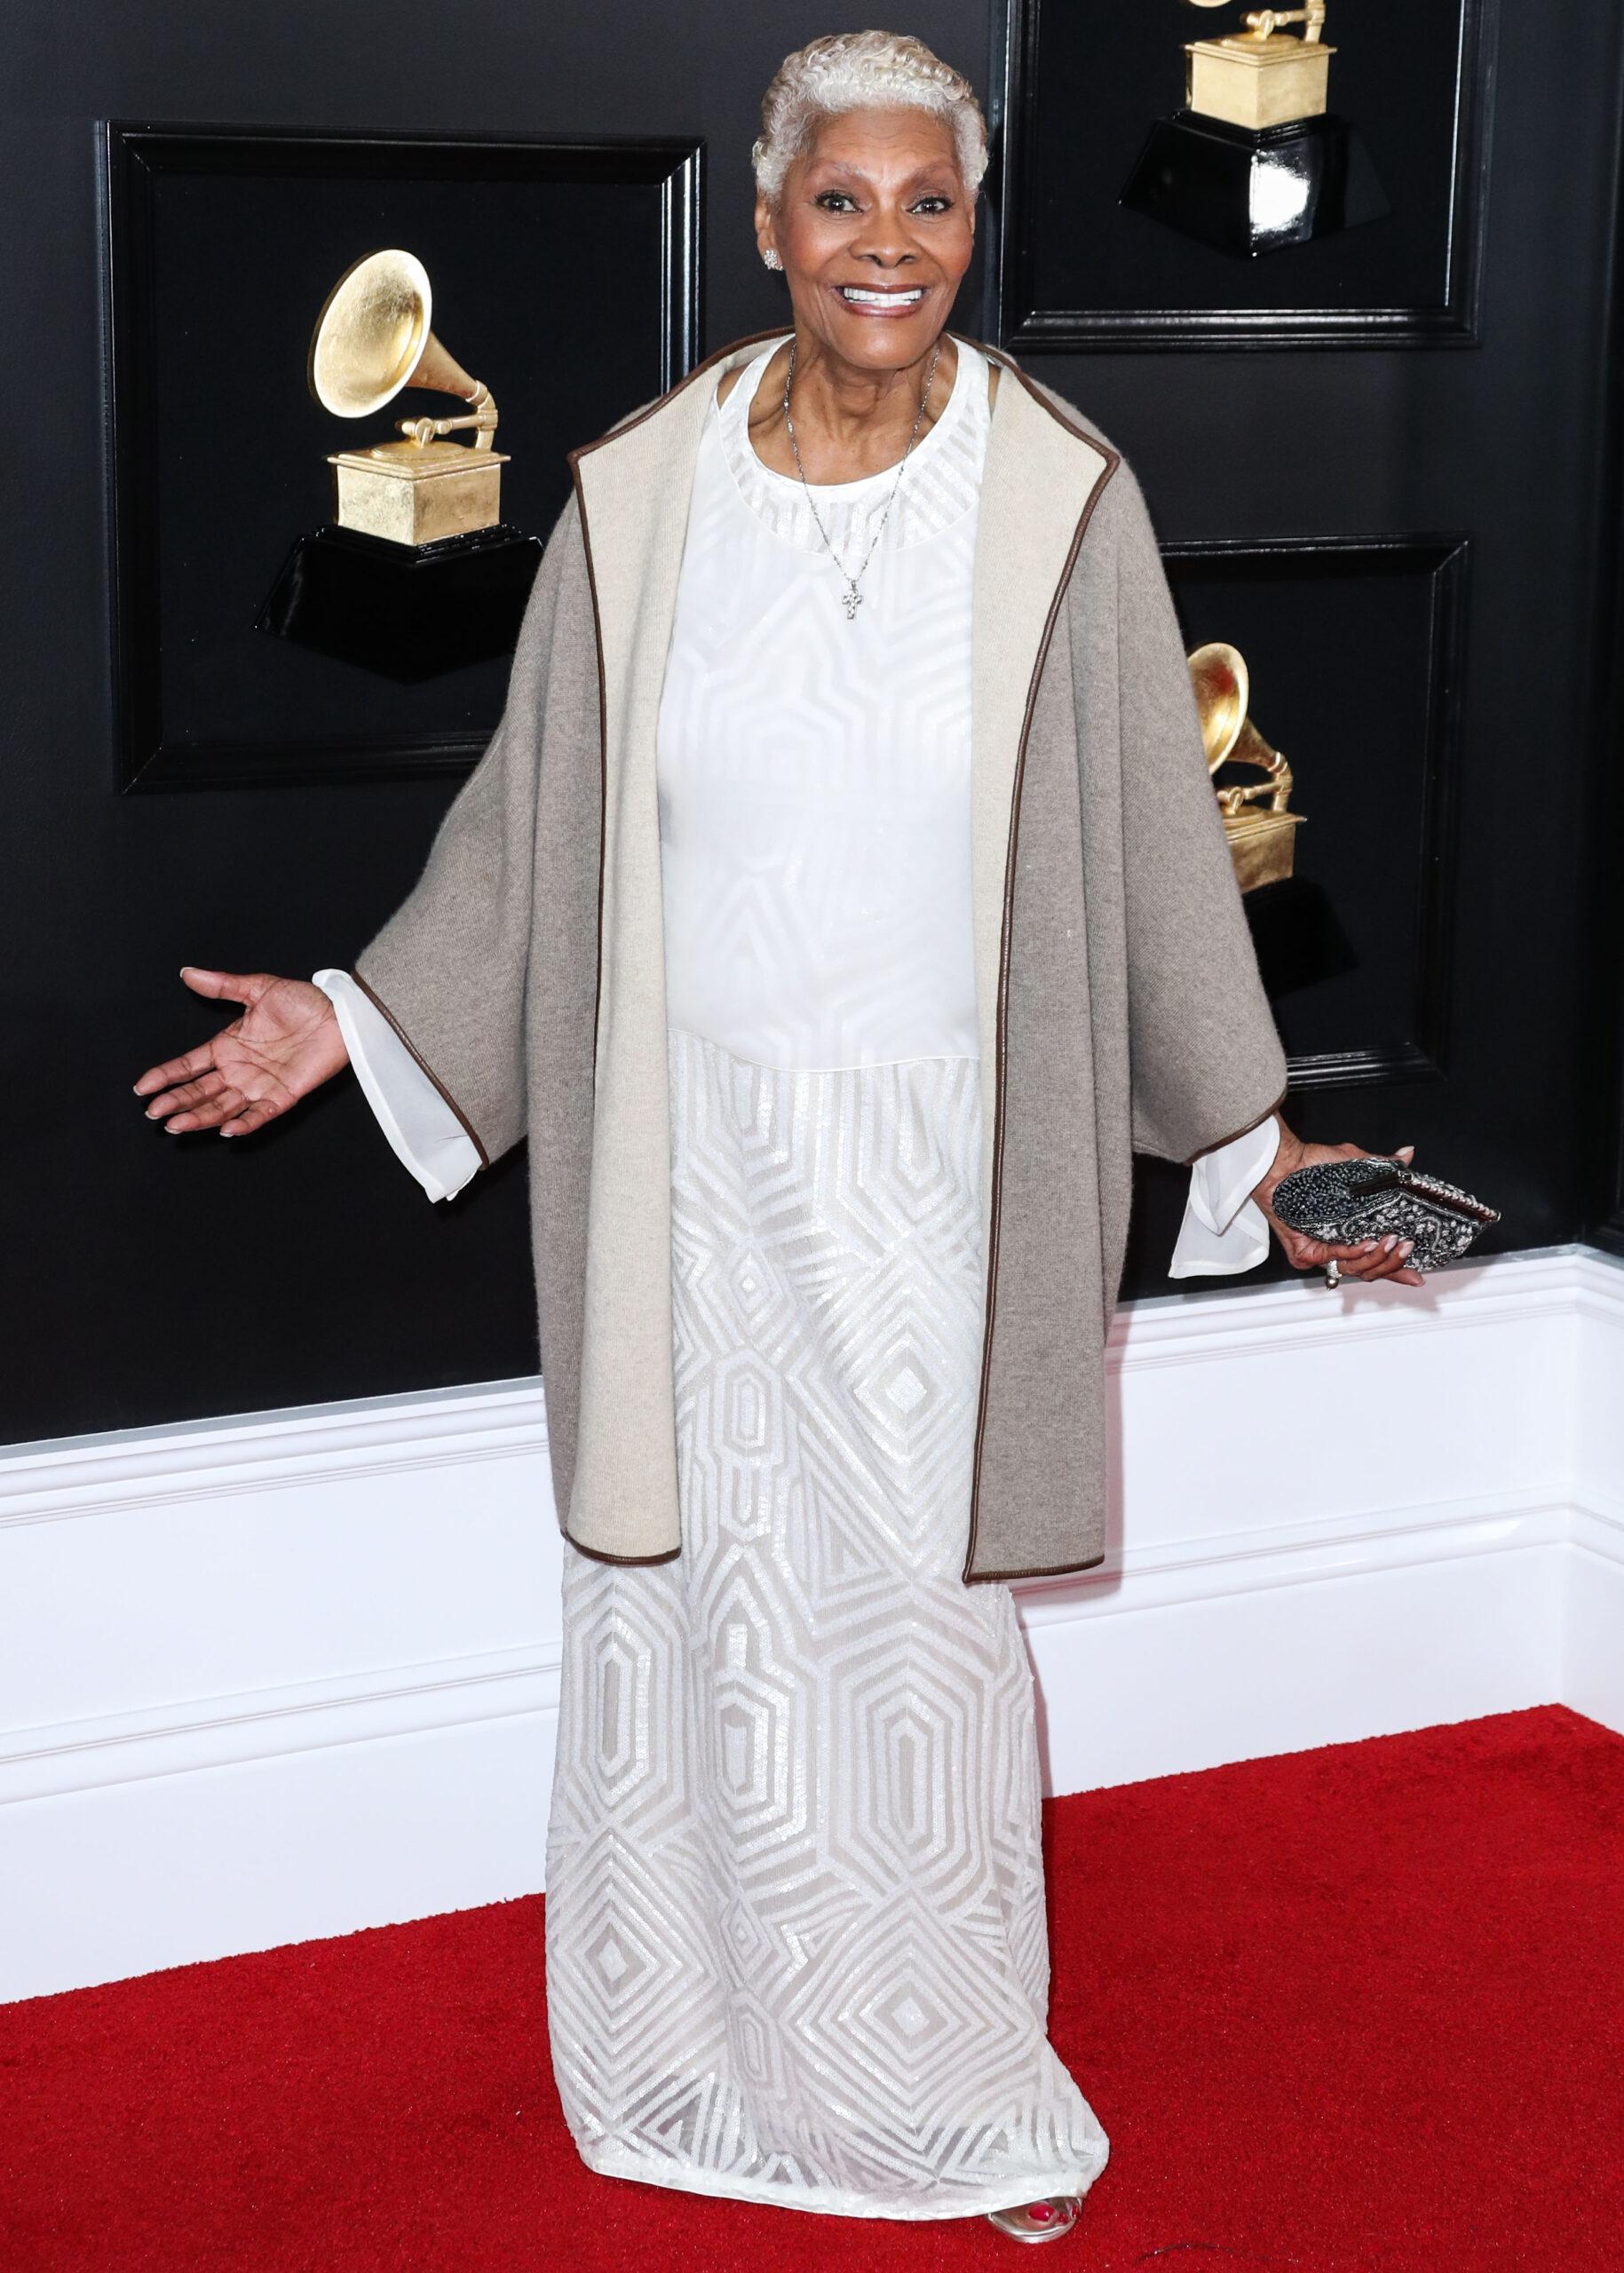 Dionne Warwick at the 61st Annual GRAMMY Awards